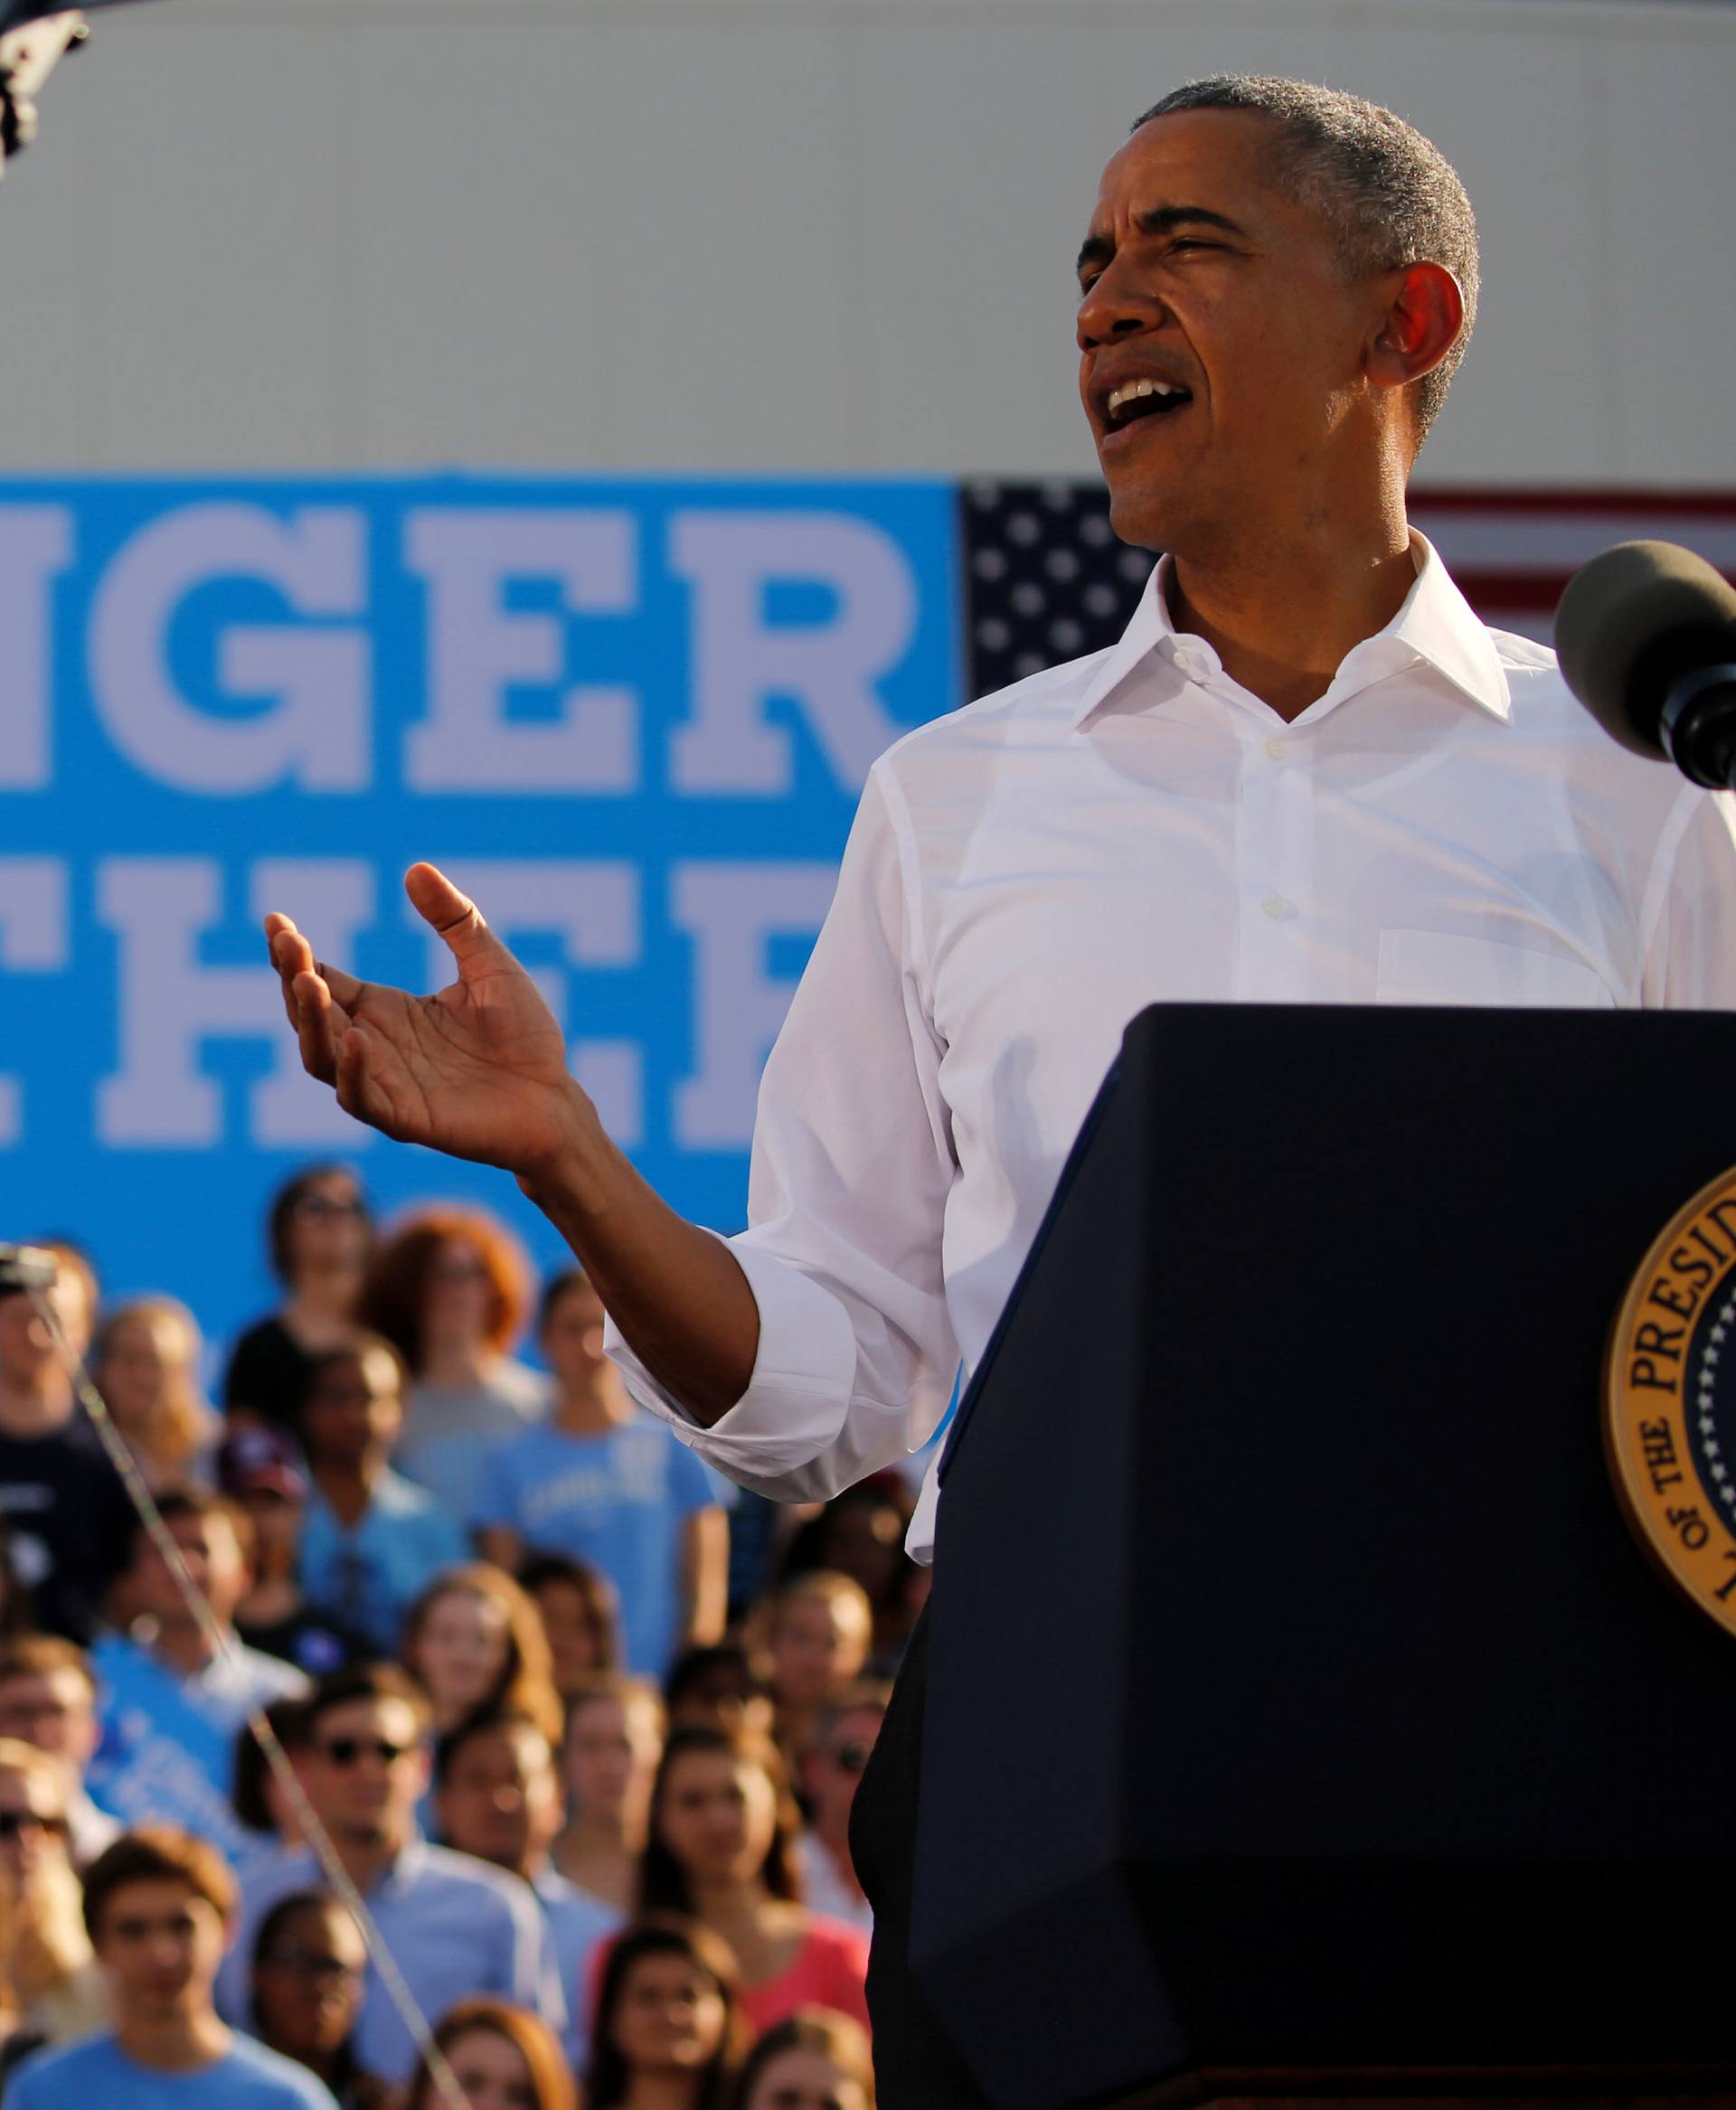 Obama delivers remarks at a campaign event in Chapel Hill, North Carolina